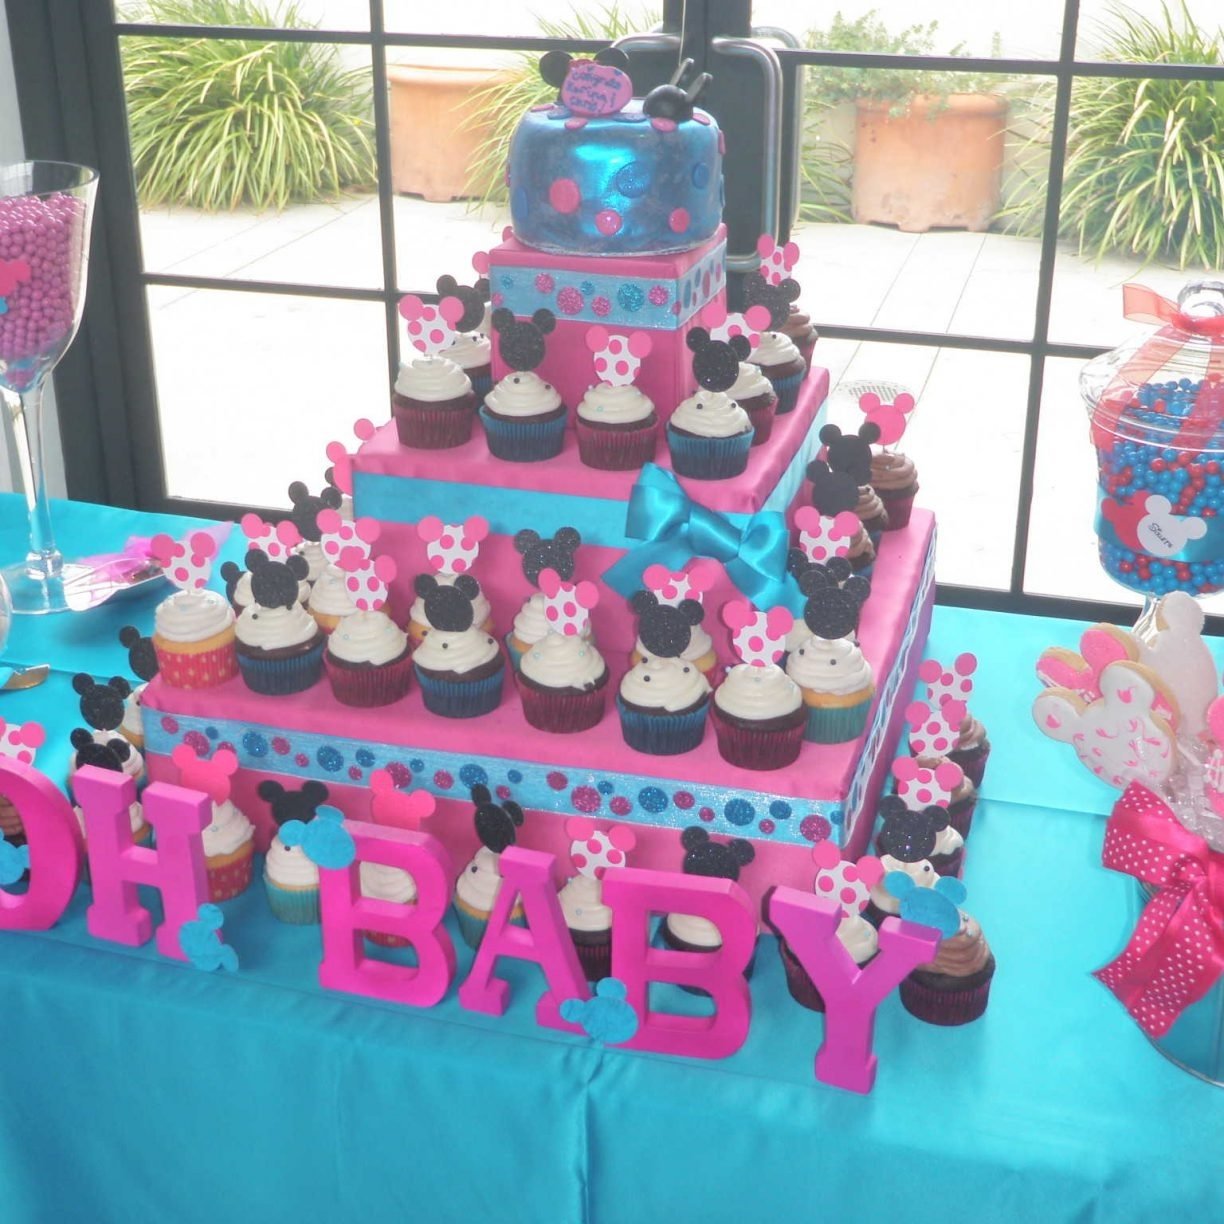 10 Elegant Cute Baby Girl Shower Ideas baby shower ideas for girls cakes boy decorations bridal gifts games 2023